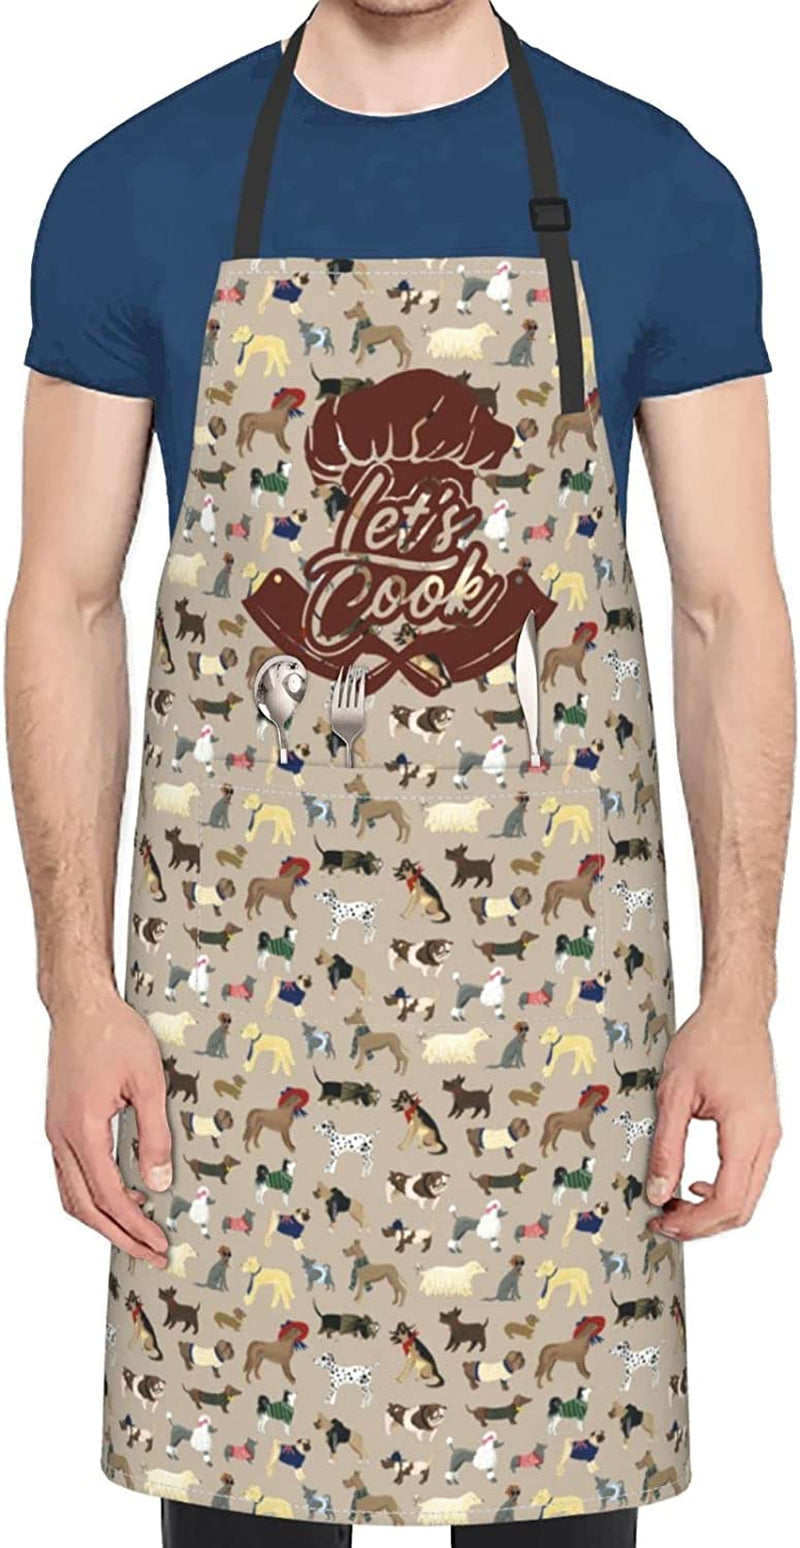  BBQ Apron  For Cooking 